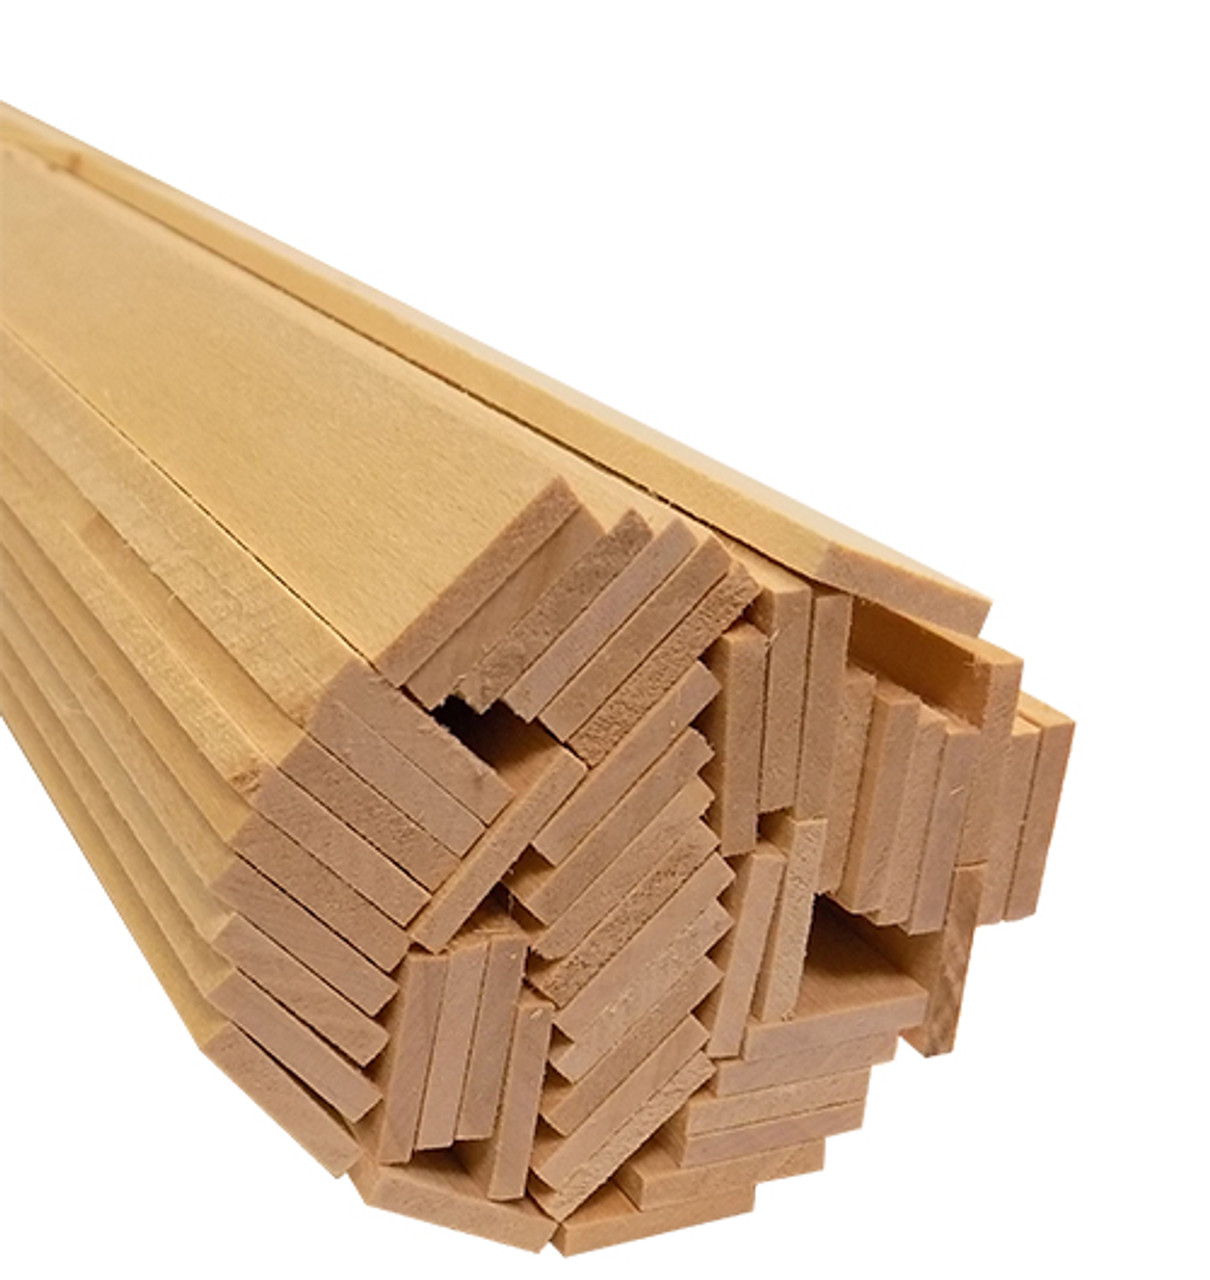 Teak wood 8-10 Feet Wooden Strips, For Furniture, Rustic at Rs 150